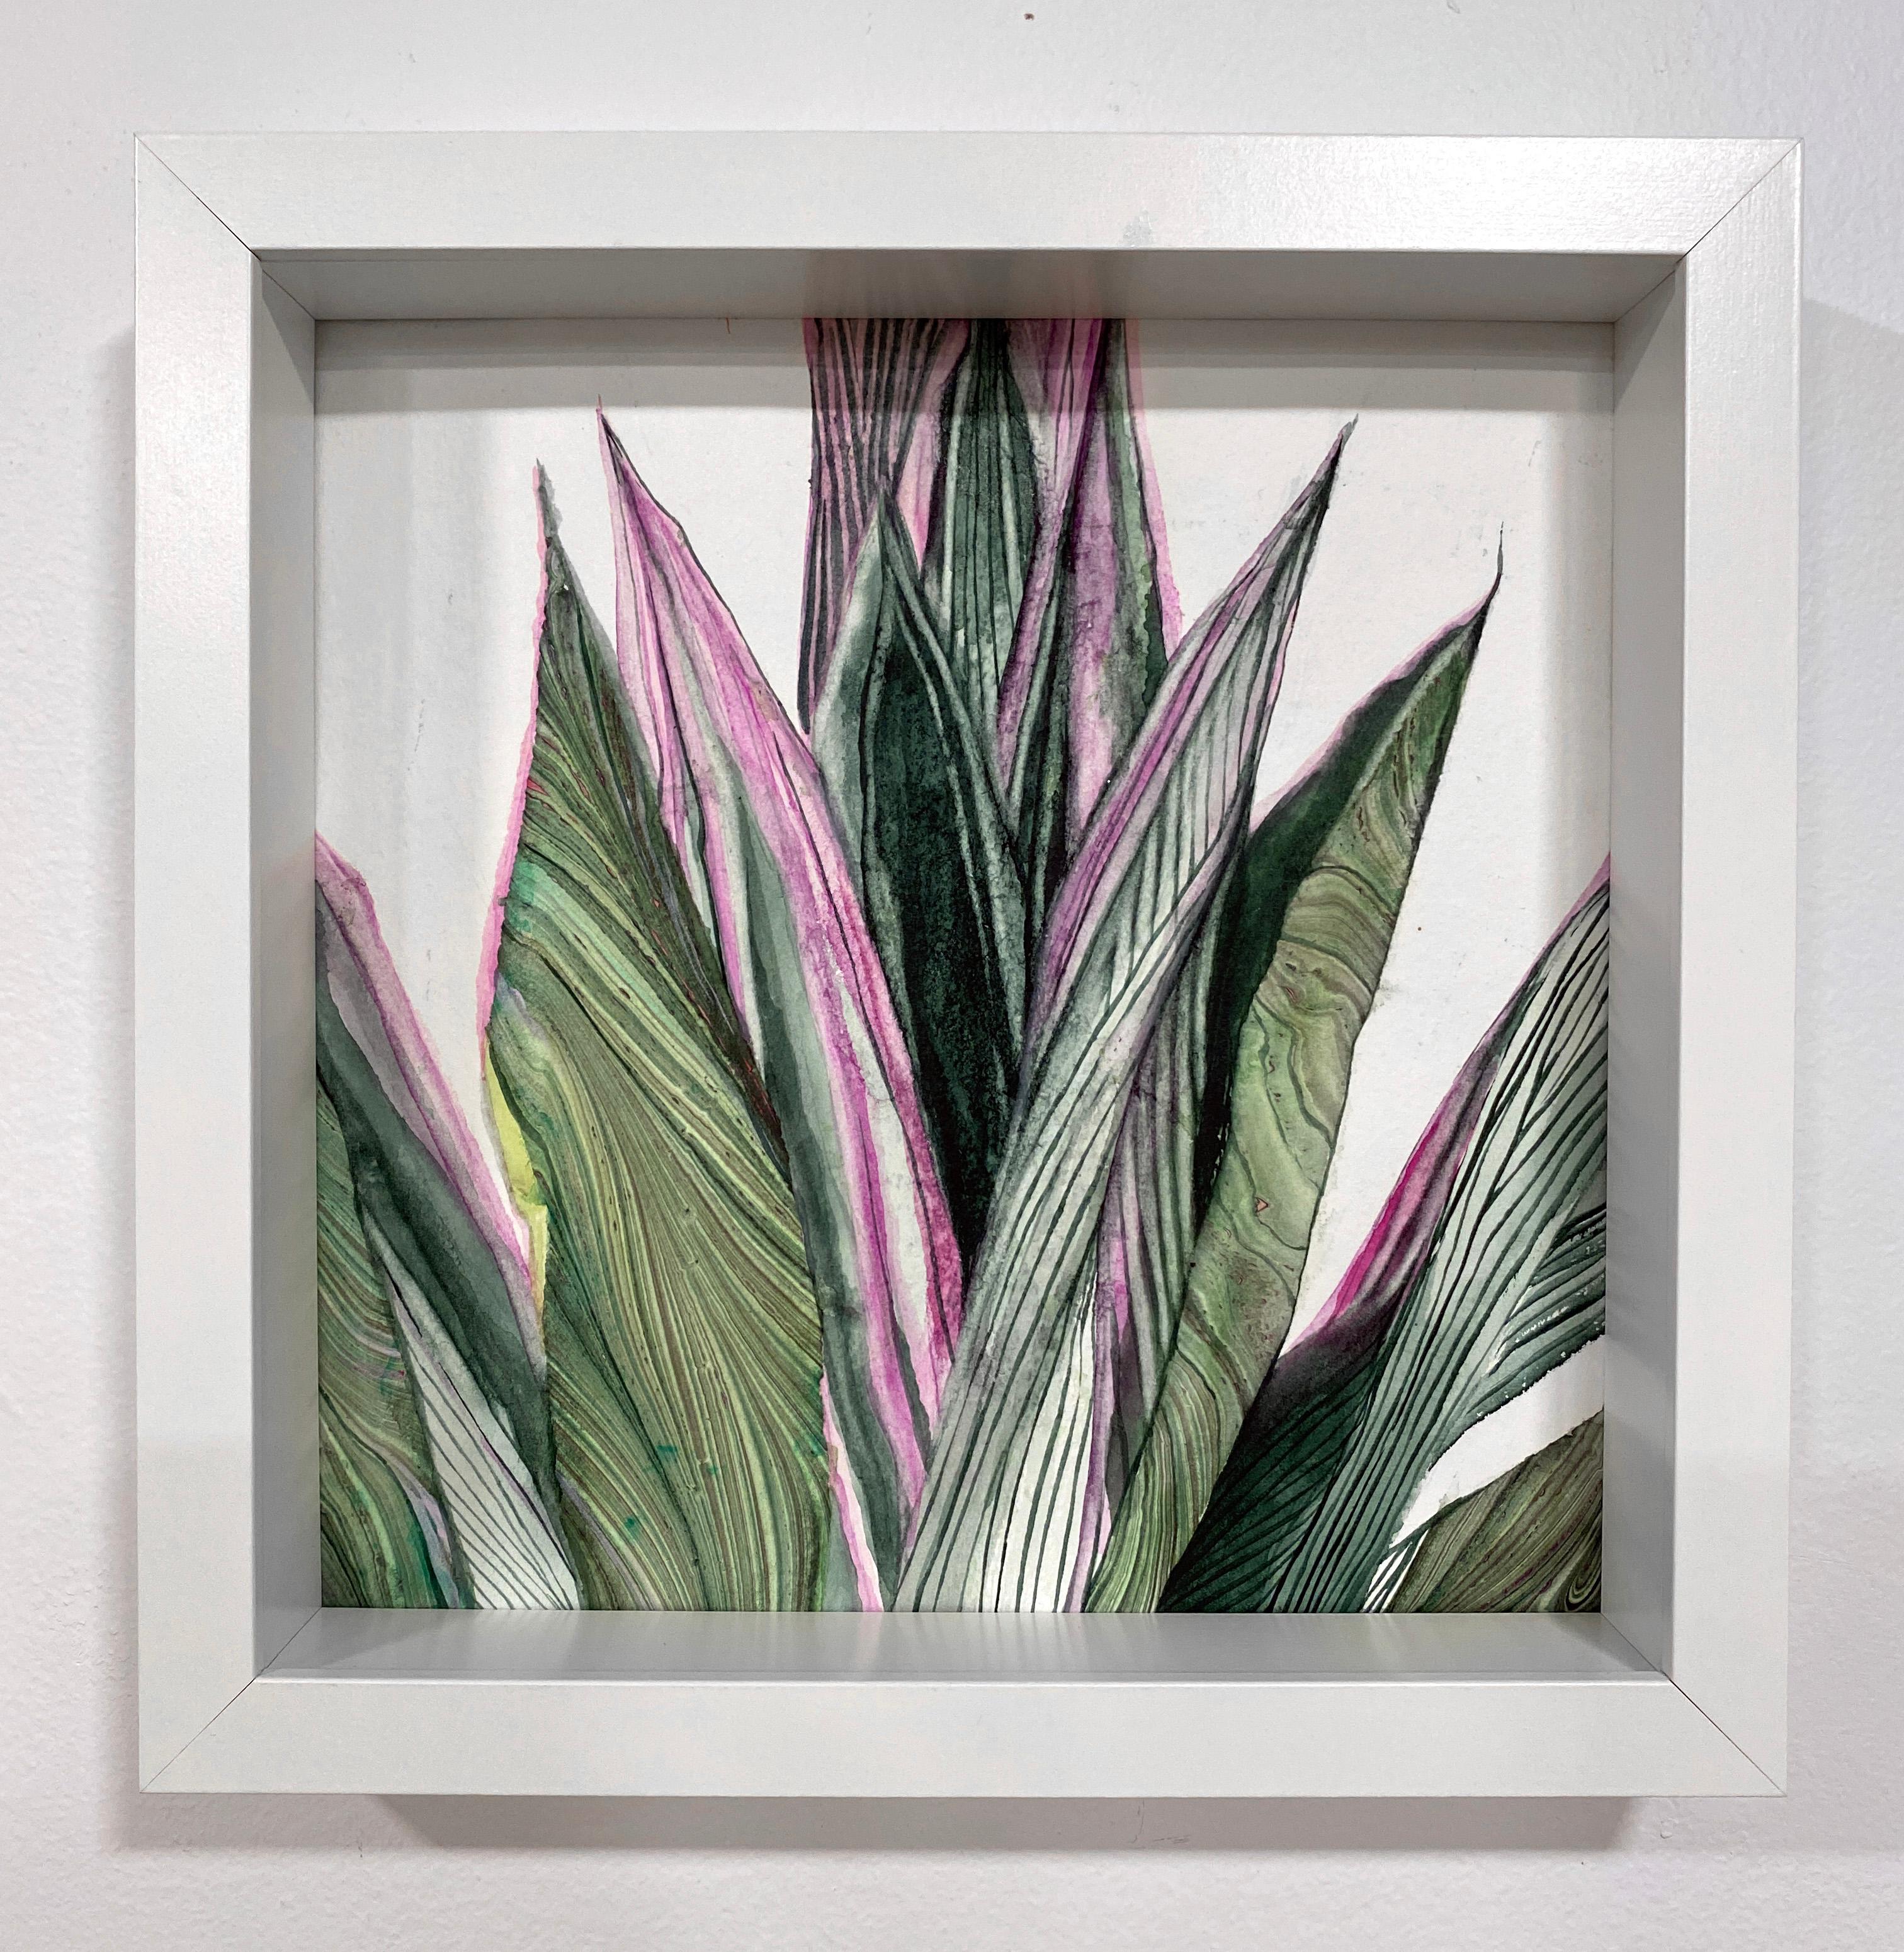 This beautiful pink and green plantlife painting allows you to explore the textures and patterns created by the hand marbeling process. 

Rachel Kohn, Marbled Plant Life, 2021, Watercolor and acrylic on paper, 9x9”, Framed dimensions: 10x10”

Artist